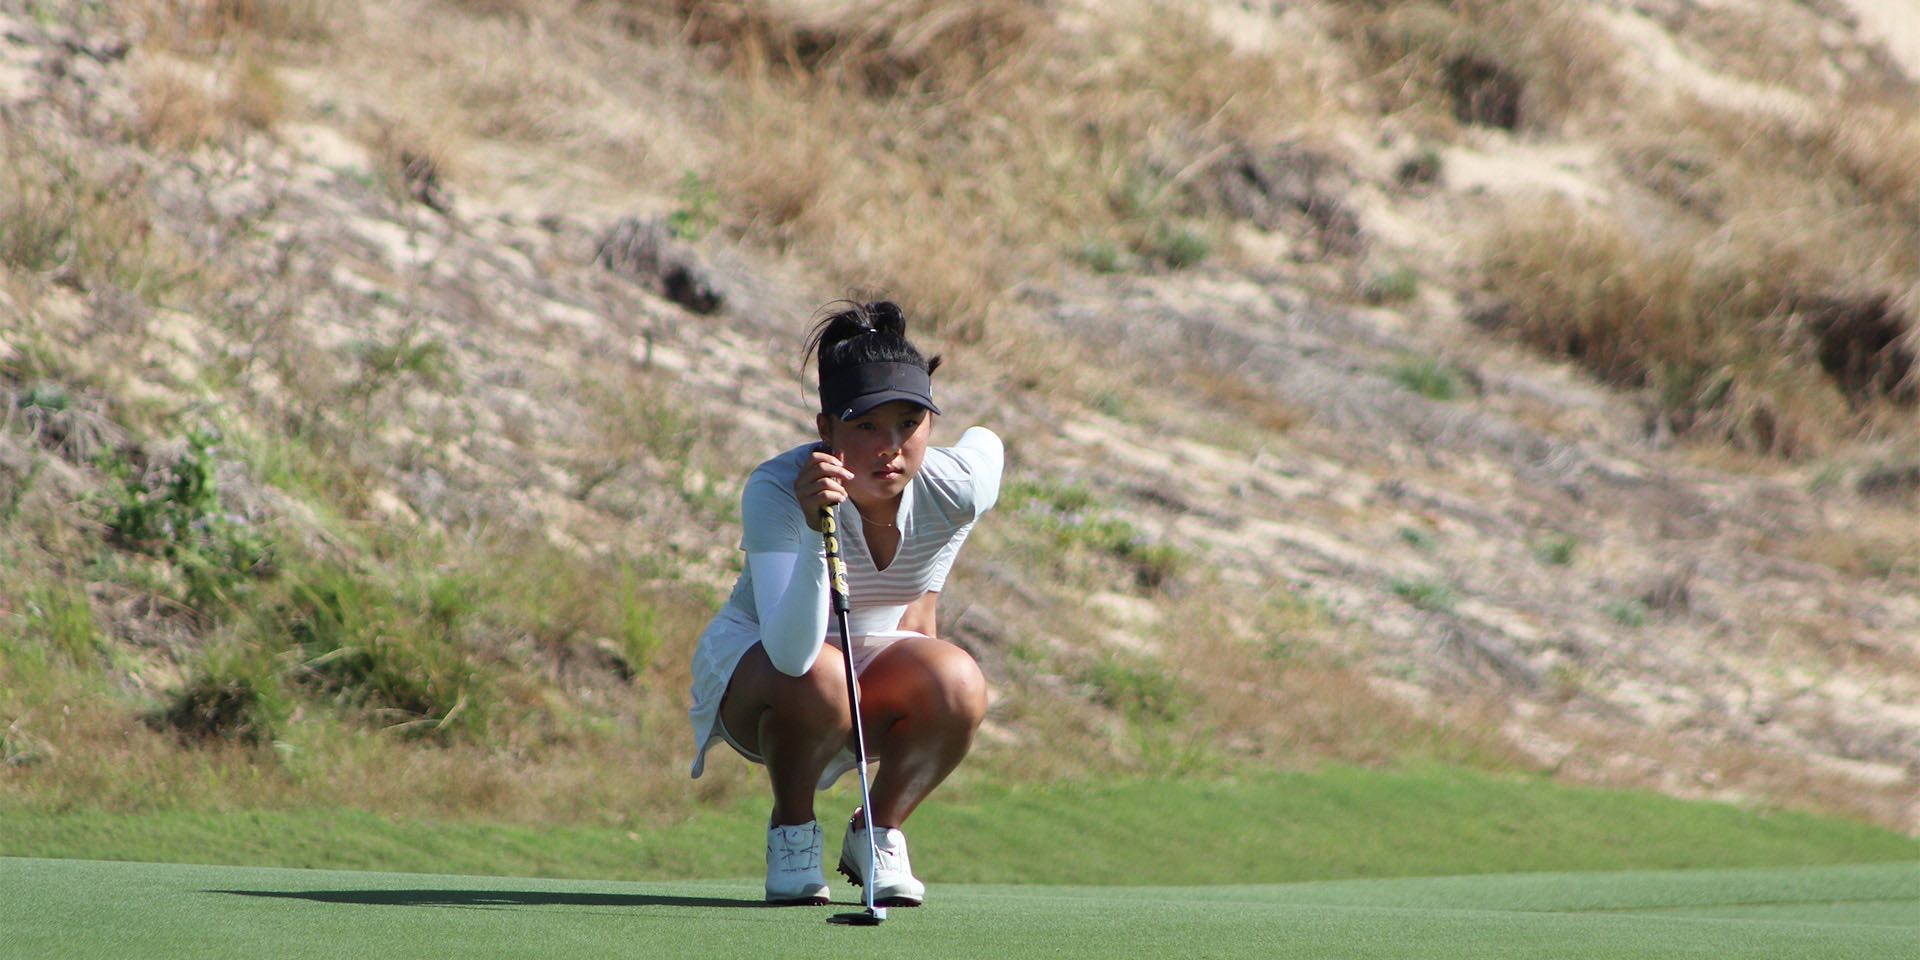 Yu Wen Lu reading her putt at the JGTA Junior Aspirations at The Bluffs, one of the many players from the JGTA leading the charge in the fight against Covid-19